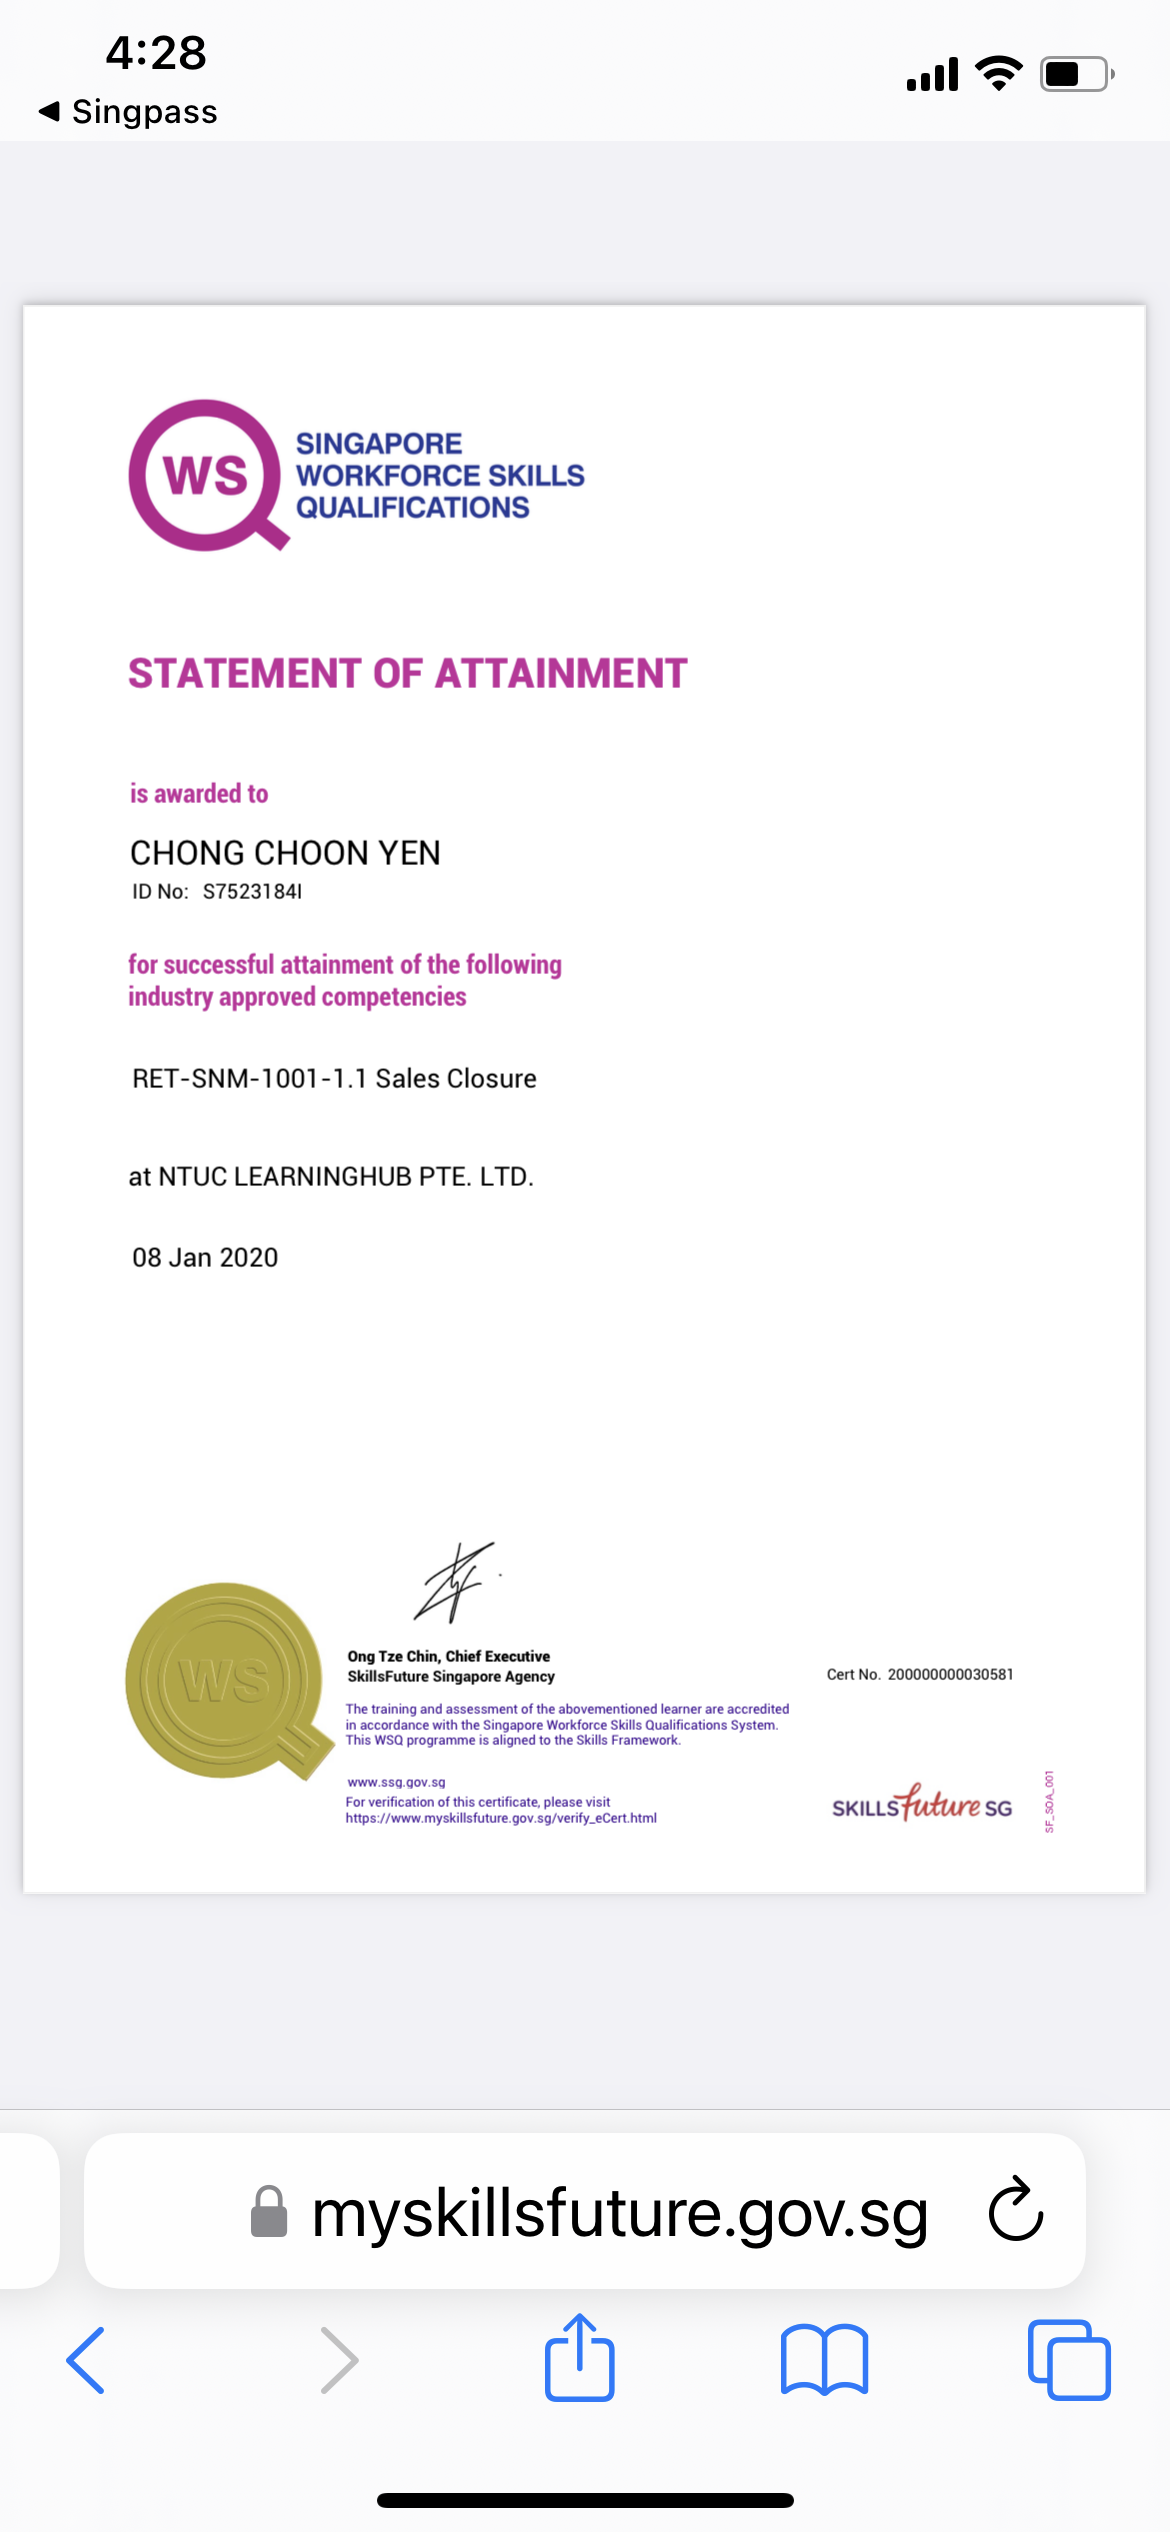 4:28

4 Singpass

al FT @)

SINGAPORE
WORKFORCE SKILLS
QUALIFICATIONS

STATEMENT OF ATTAINMENT

is awarded to

CHONG CHOON YEN

ID No: $75231841

for successful attainment of the following
industry approved competencies

RET-SNM-1001-1.1 Sales Closure

at NTUC LEARNINGHUB PTE. LTD.

08 Jan 2020

#

Ong Tze Chin, Chief Executive
SkillsFuture Singapore Agency Cert No. 2000000003058)
The ranng and assessment of the abovementioned learner are accredried

in accordance with the Singapare Workforce Skills Quakfications System
This WSQ programme is aligned 10 the Skills Framework

 

wow 333. 00v 39
For verification of this certificate. please vist
Pps woe myskilafuture gov 39/ very. Cort amd SKILLS SG

&amp; myskillsfuture.gov.sg C
&lt; Mh Mm